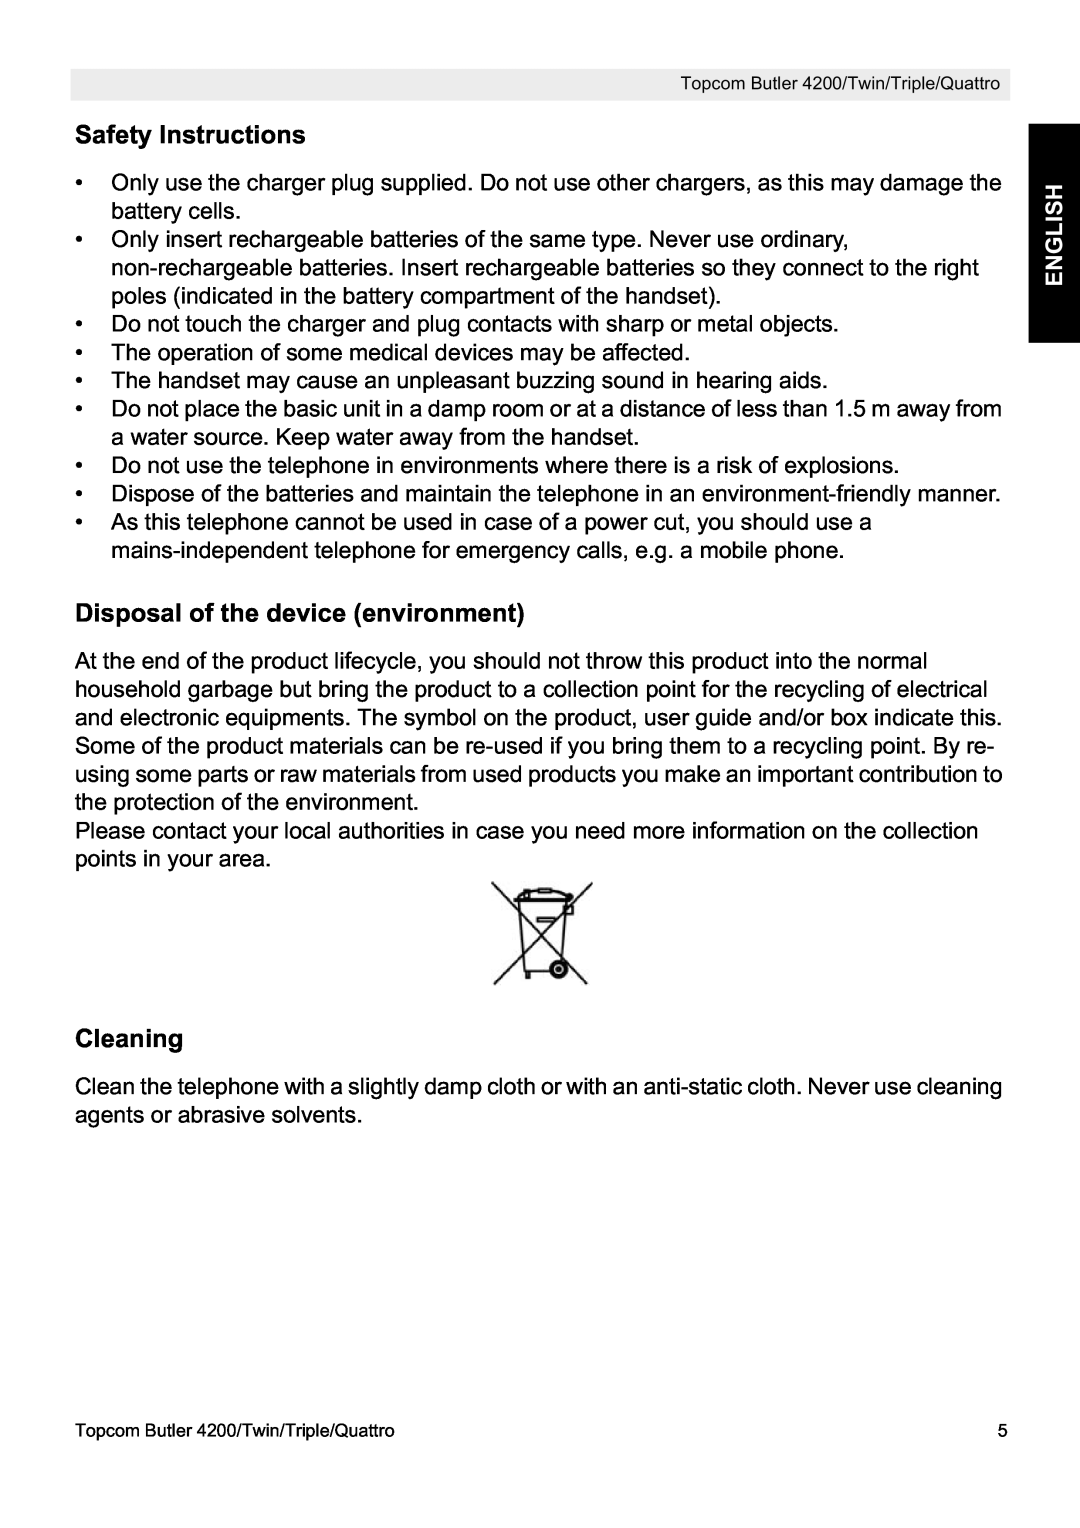 Topcom BUTLER 4200 manual Safety Instructions, Disposal of the device environment, Cleaning, English 